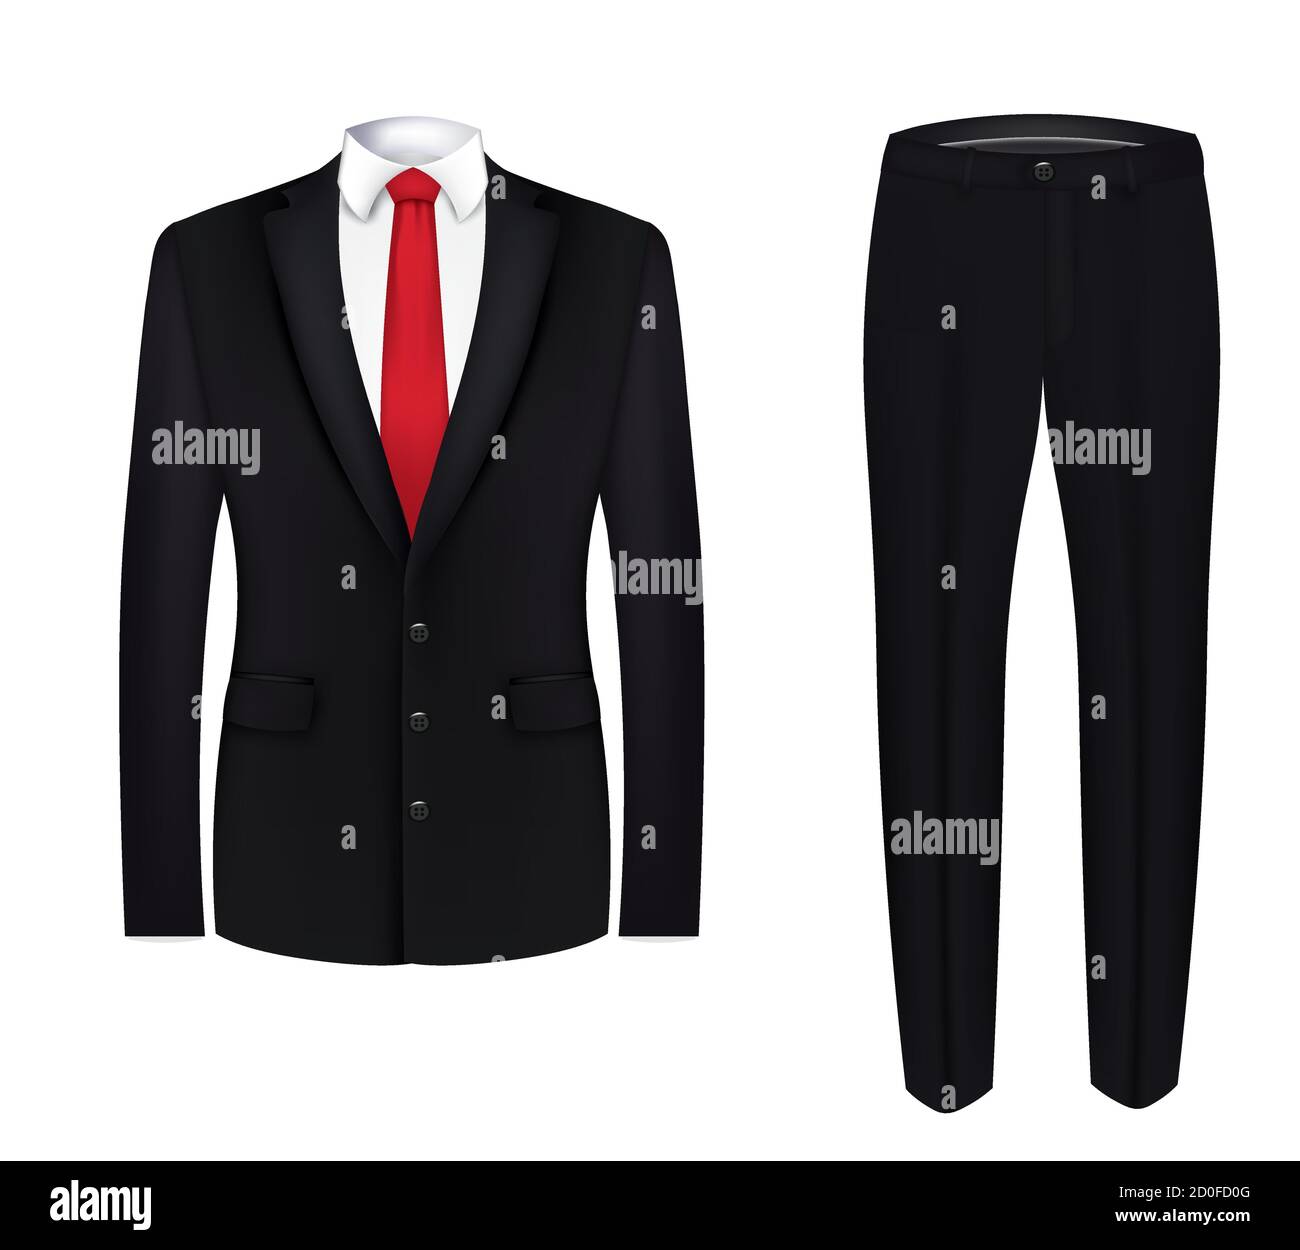 Red tie, white shirt and black suit 